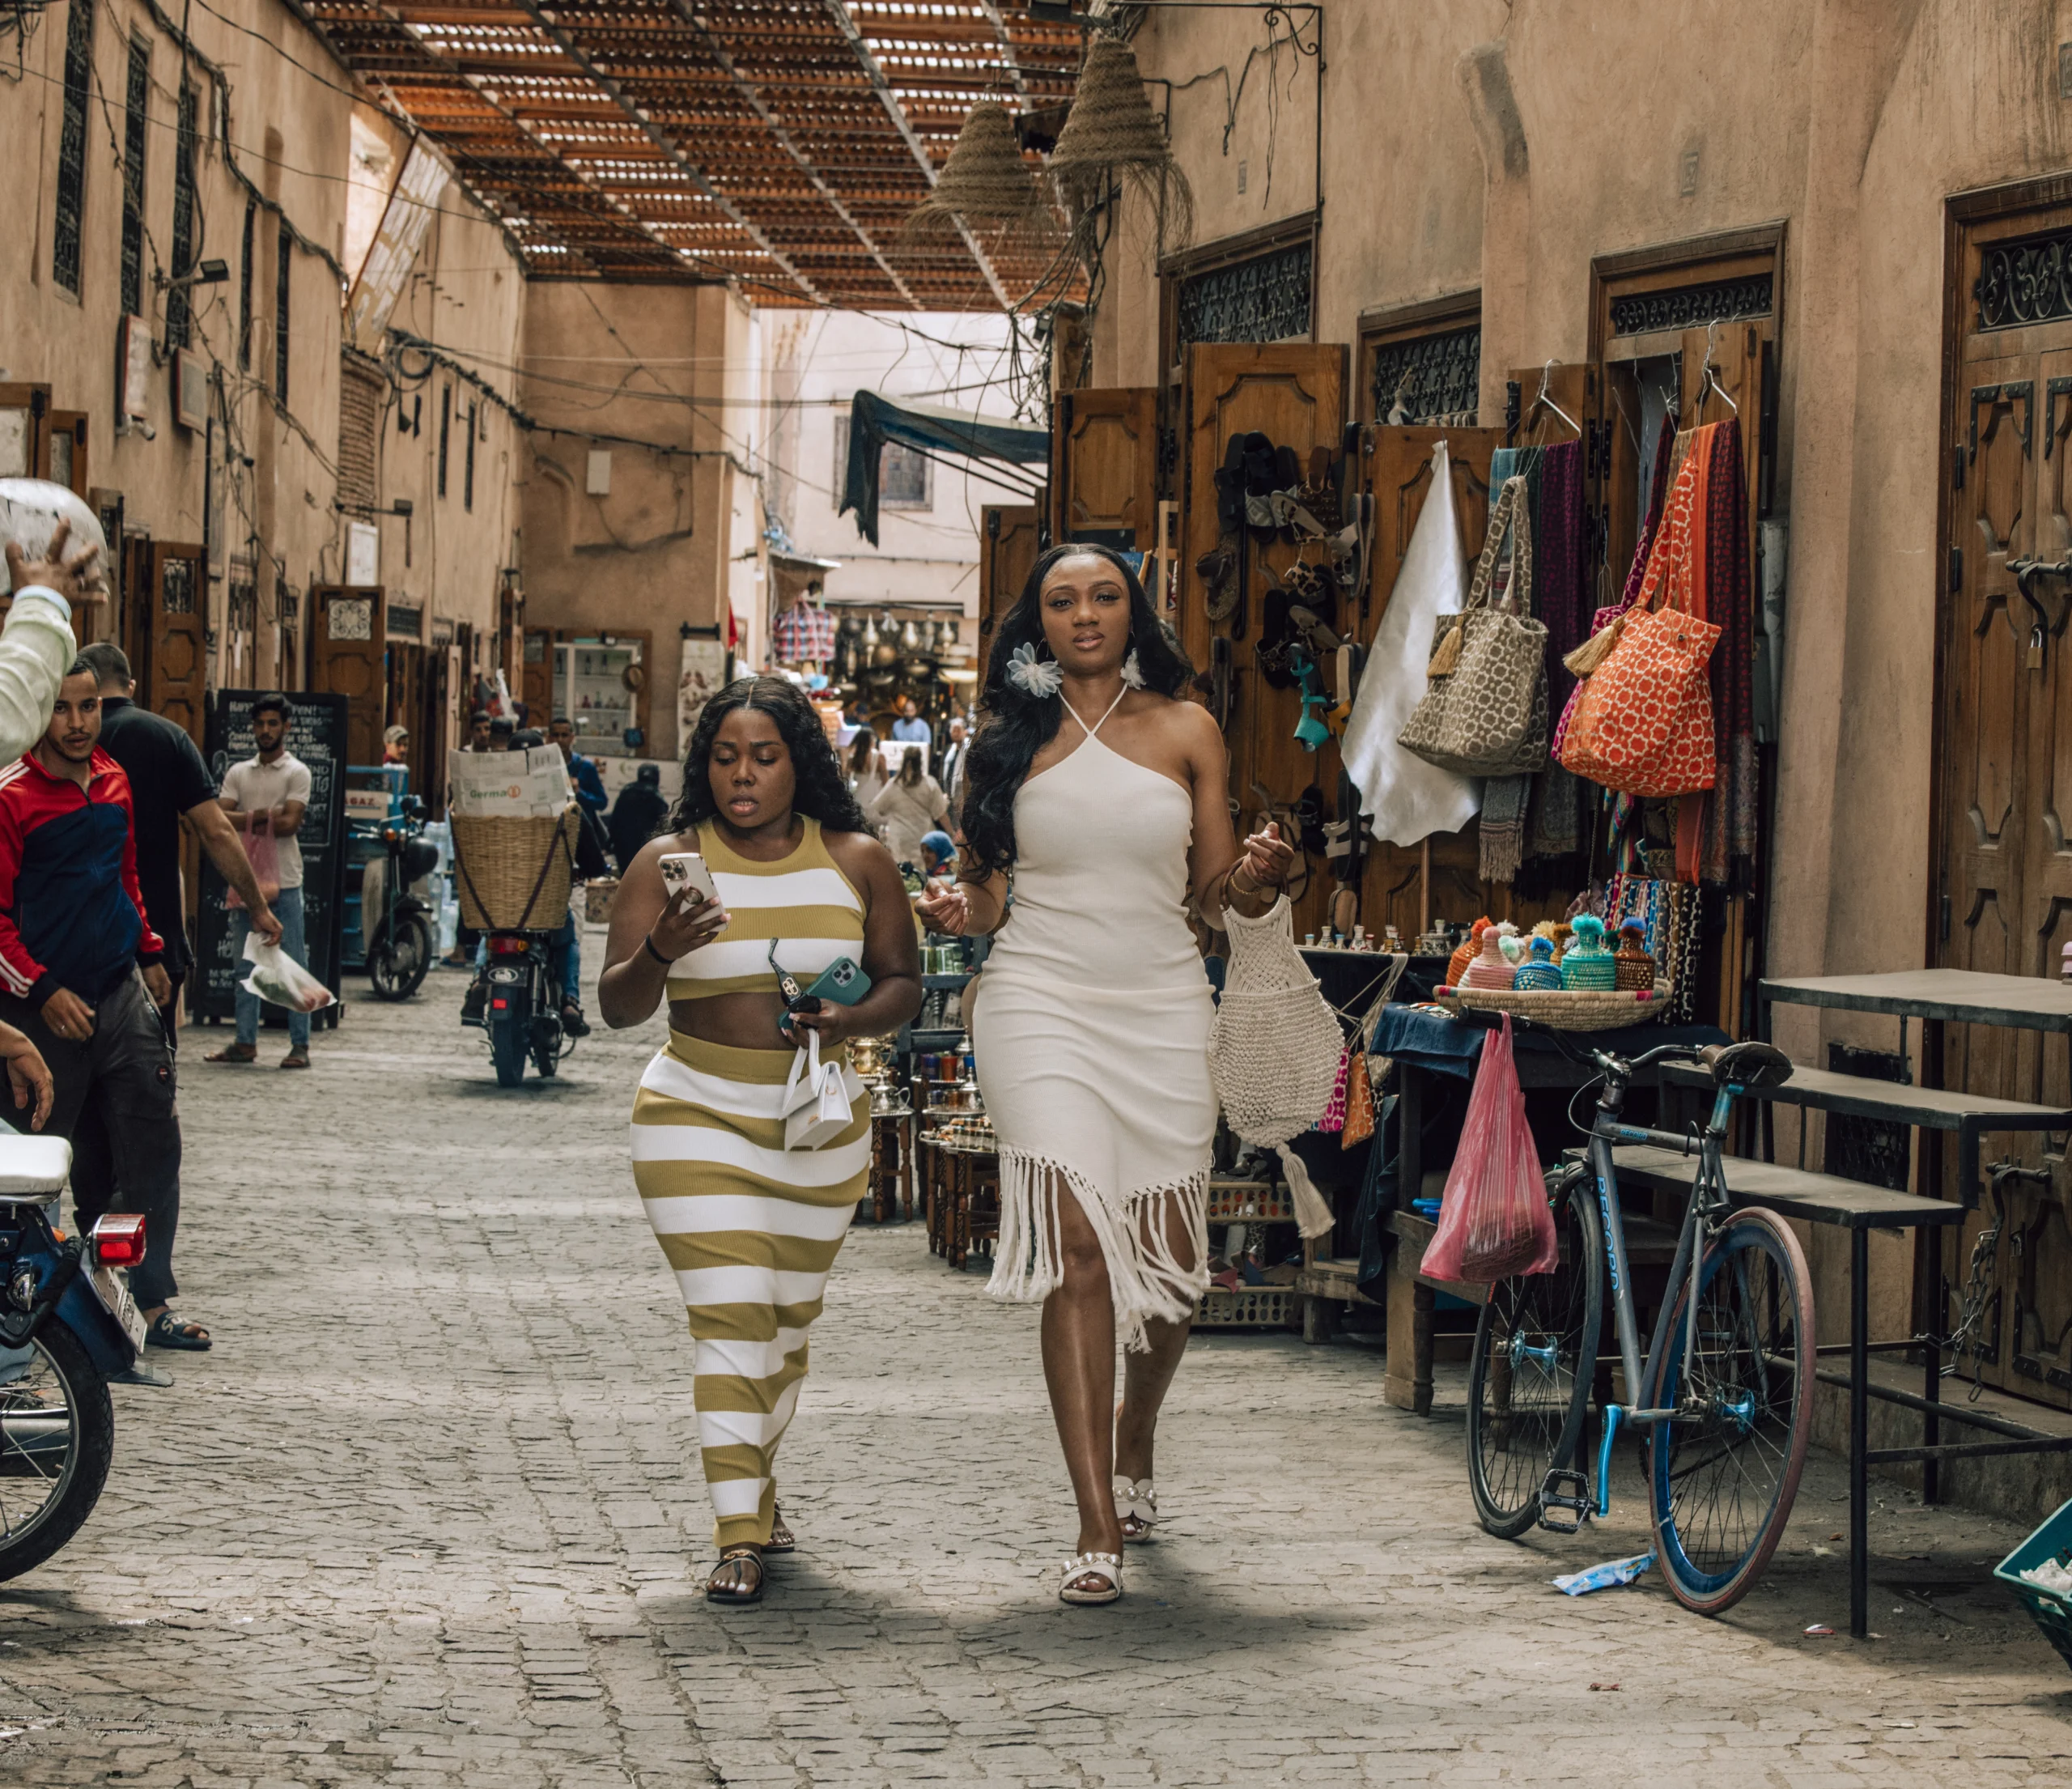 Traveling to Morocco: Safety Tips for Solo and Female Travelers